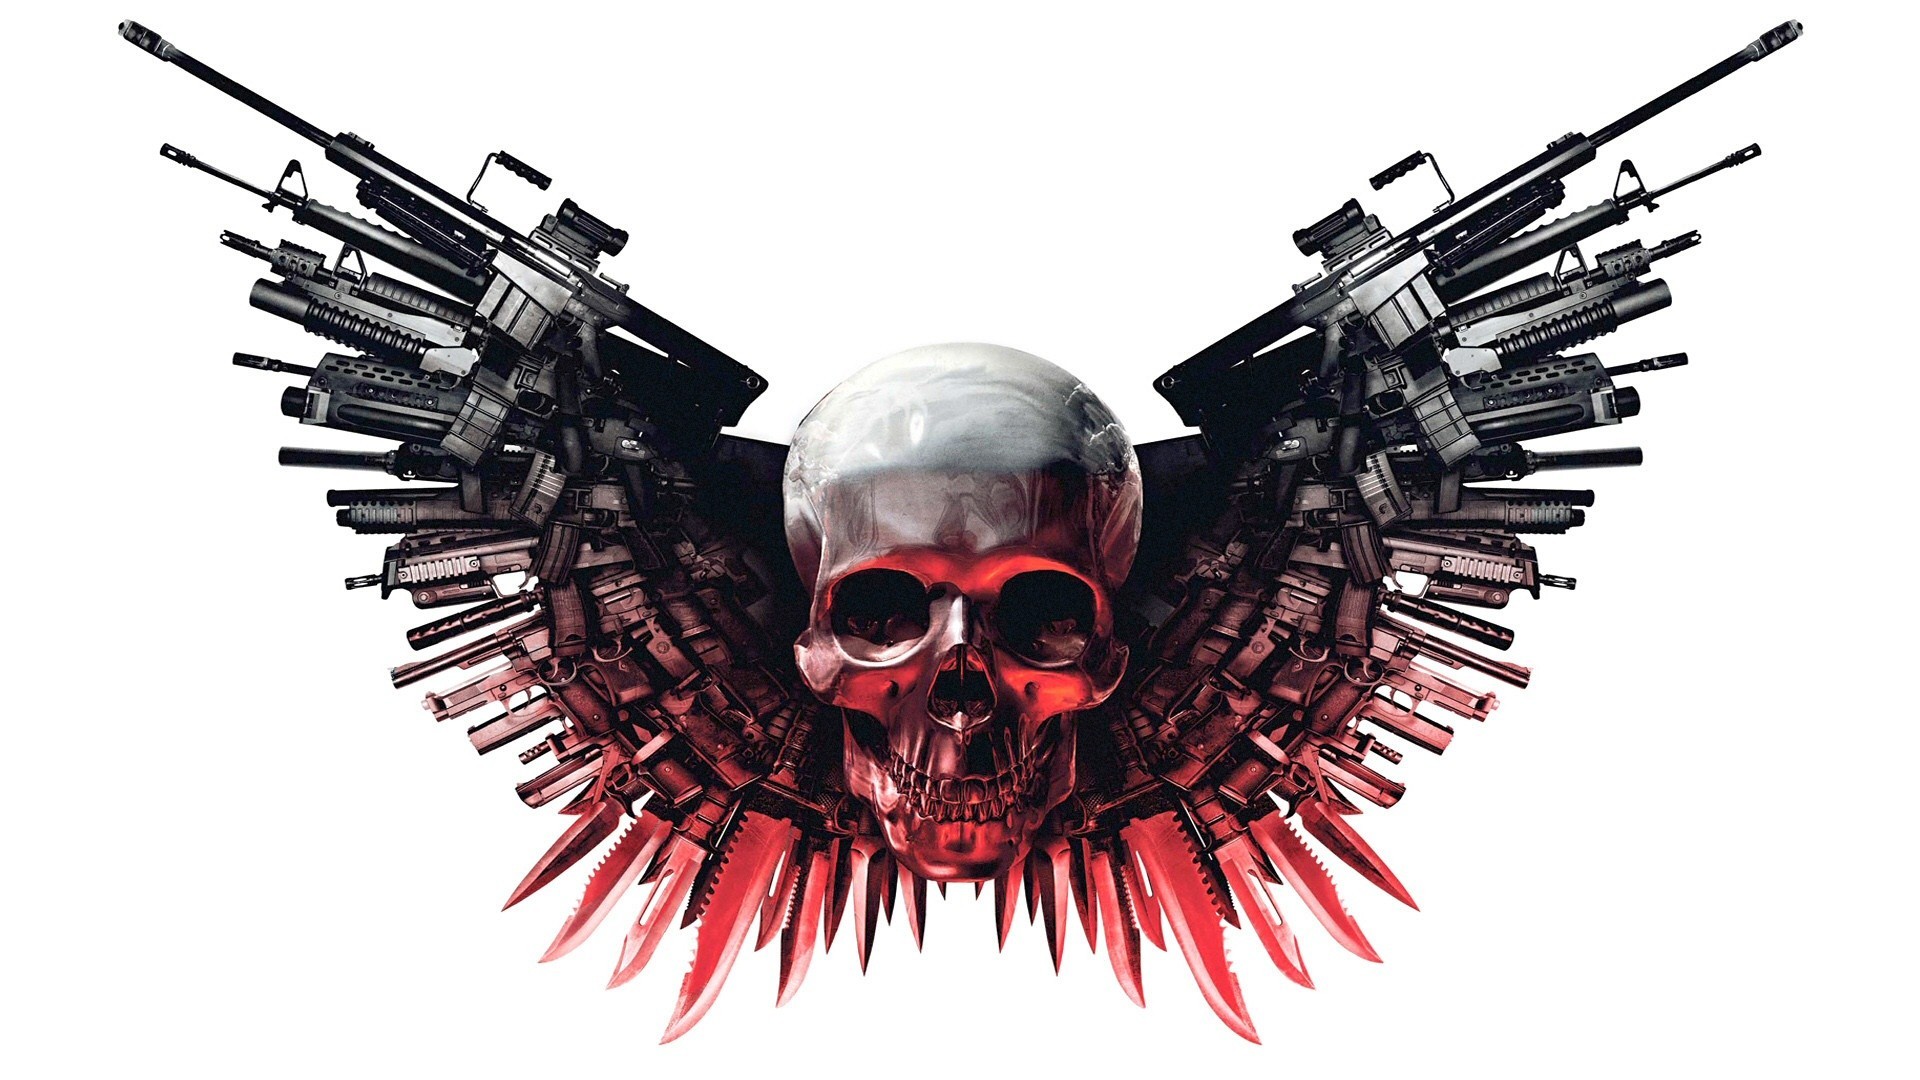 General 1920x1080 The Expendables weapon gun skull movies white background simple background